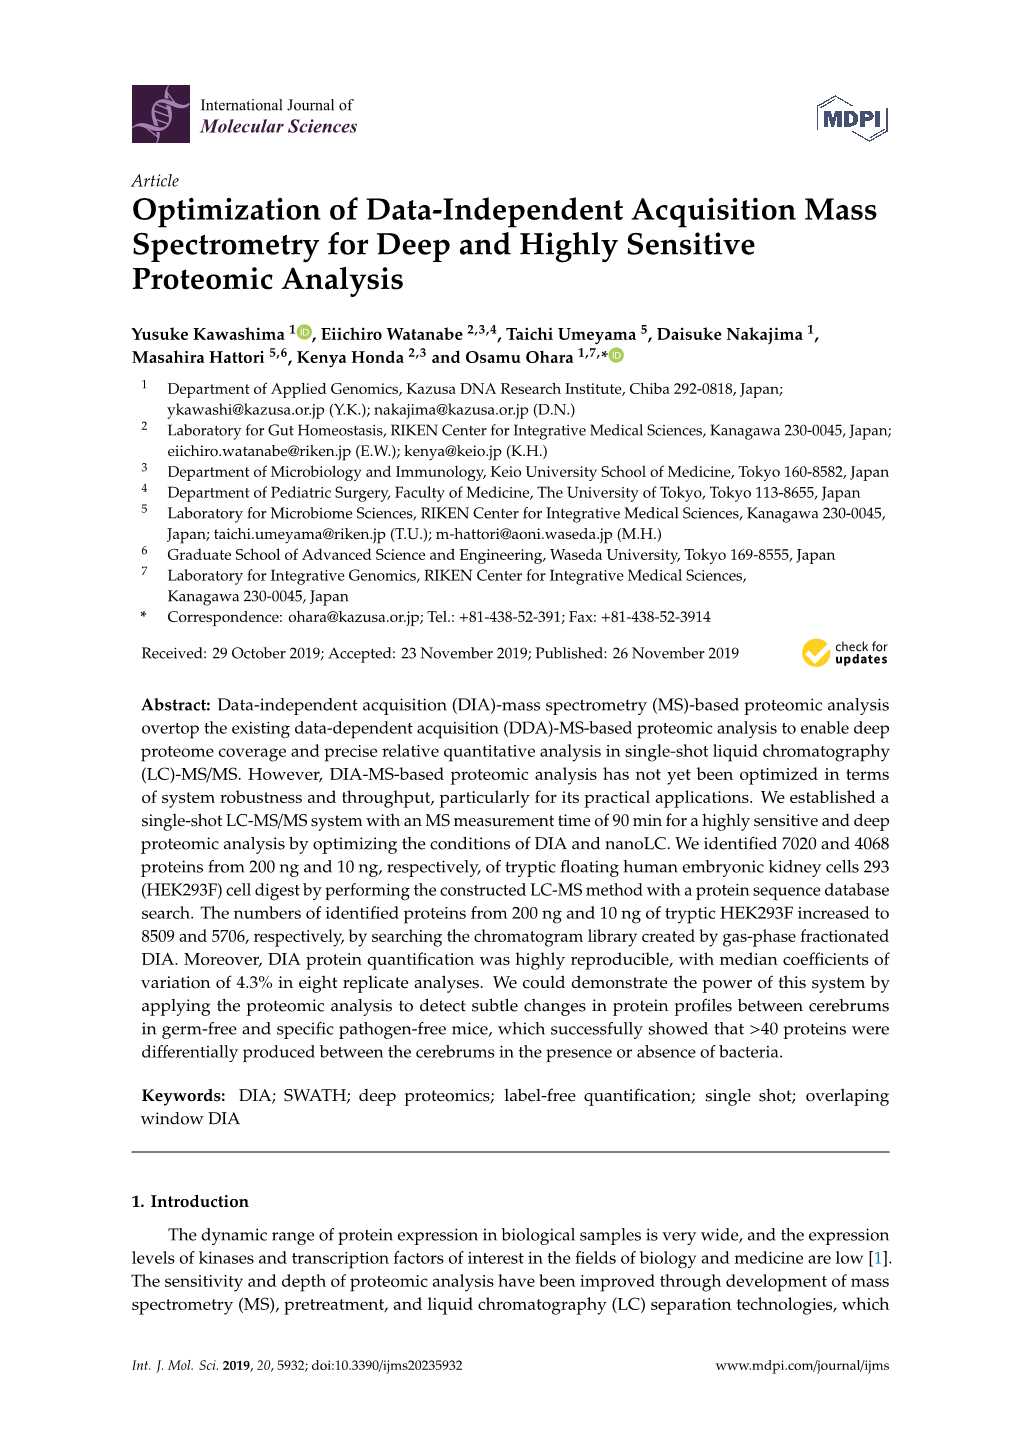 Optimization of Data-Independent Acquisition Mass Spectrometry for Deep and Highly Sensitive Proteomic Analysis